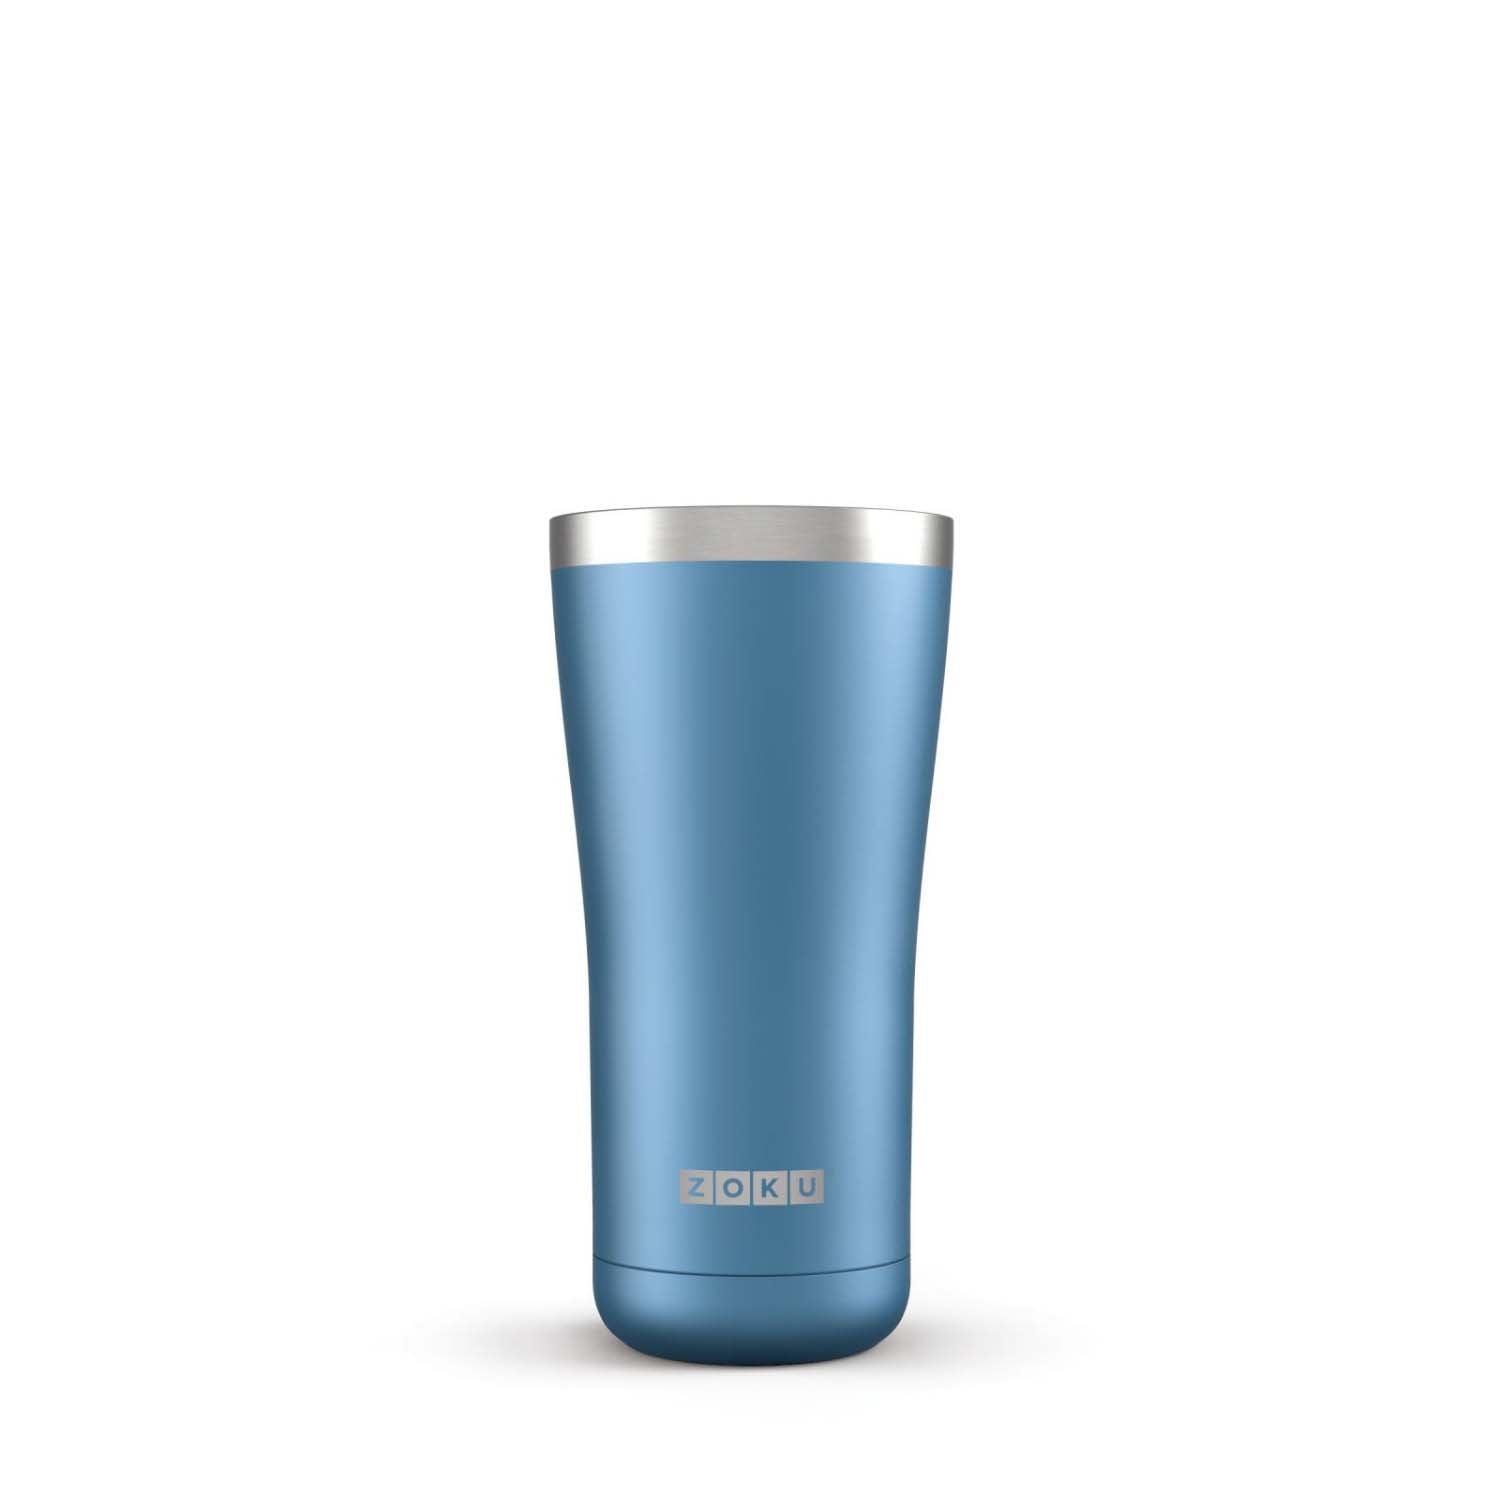 Zoku 3 in 1 Stainless Steel Tumbler - Blue